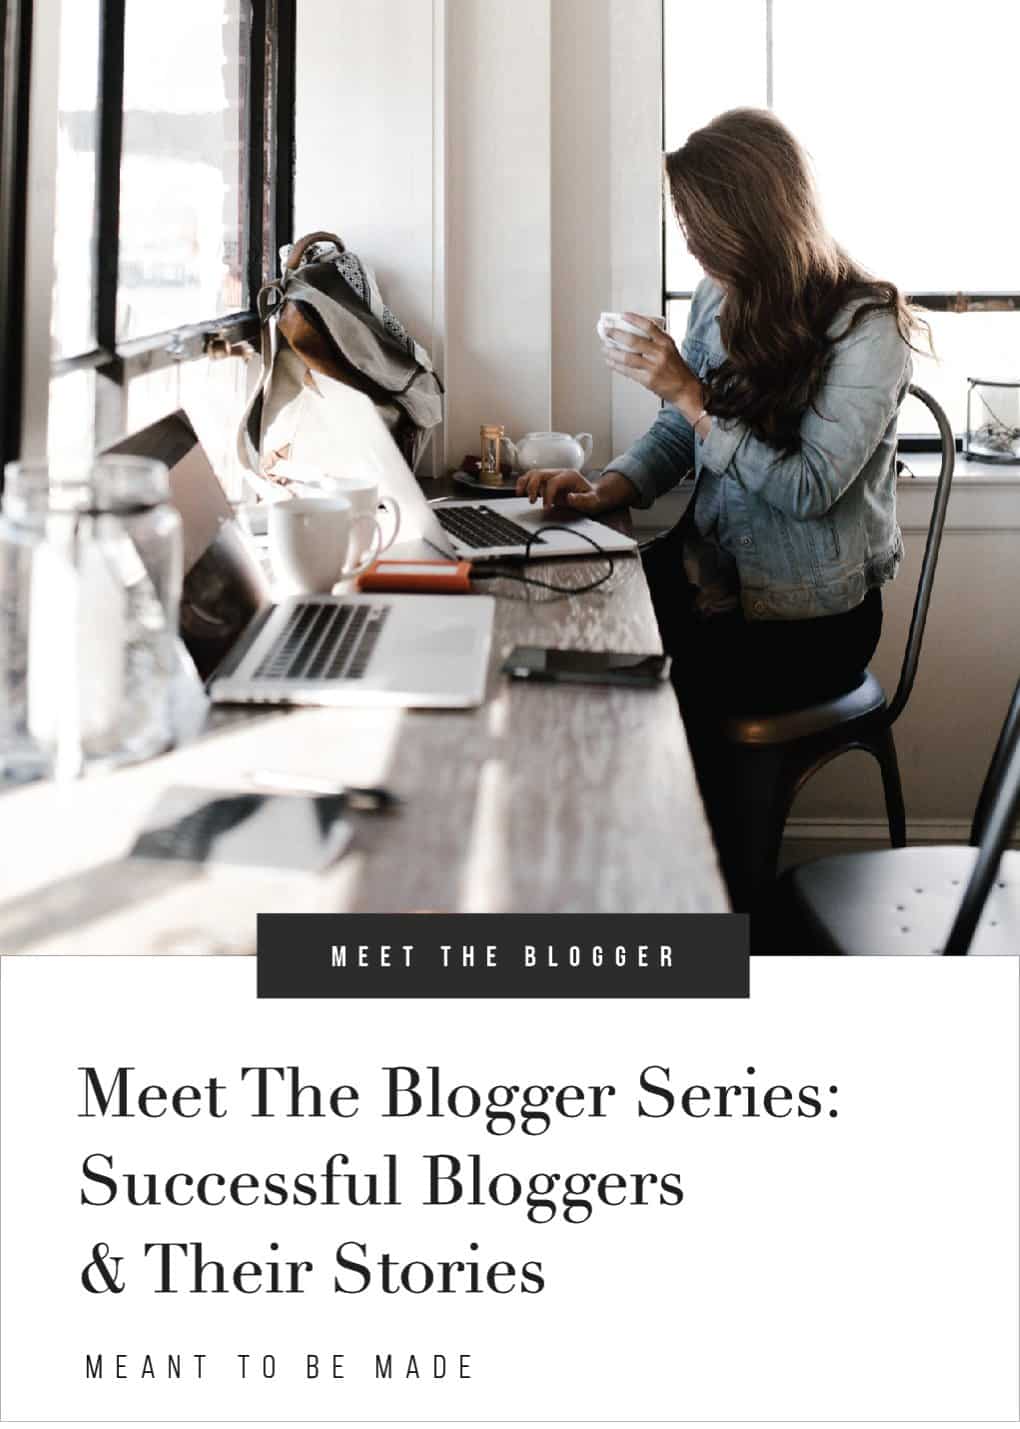 Meet The Blogger Series: Successful Bloggers & Their Stories